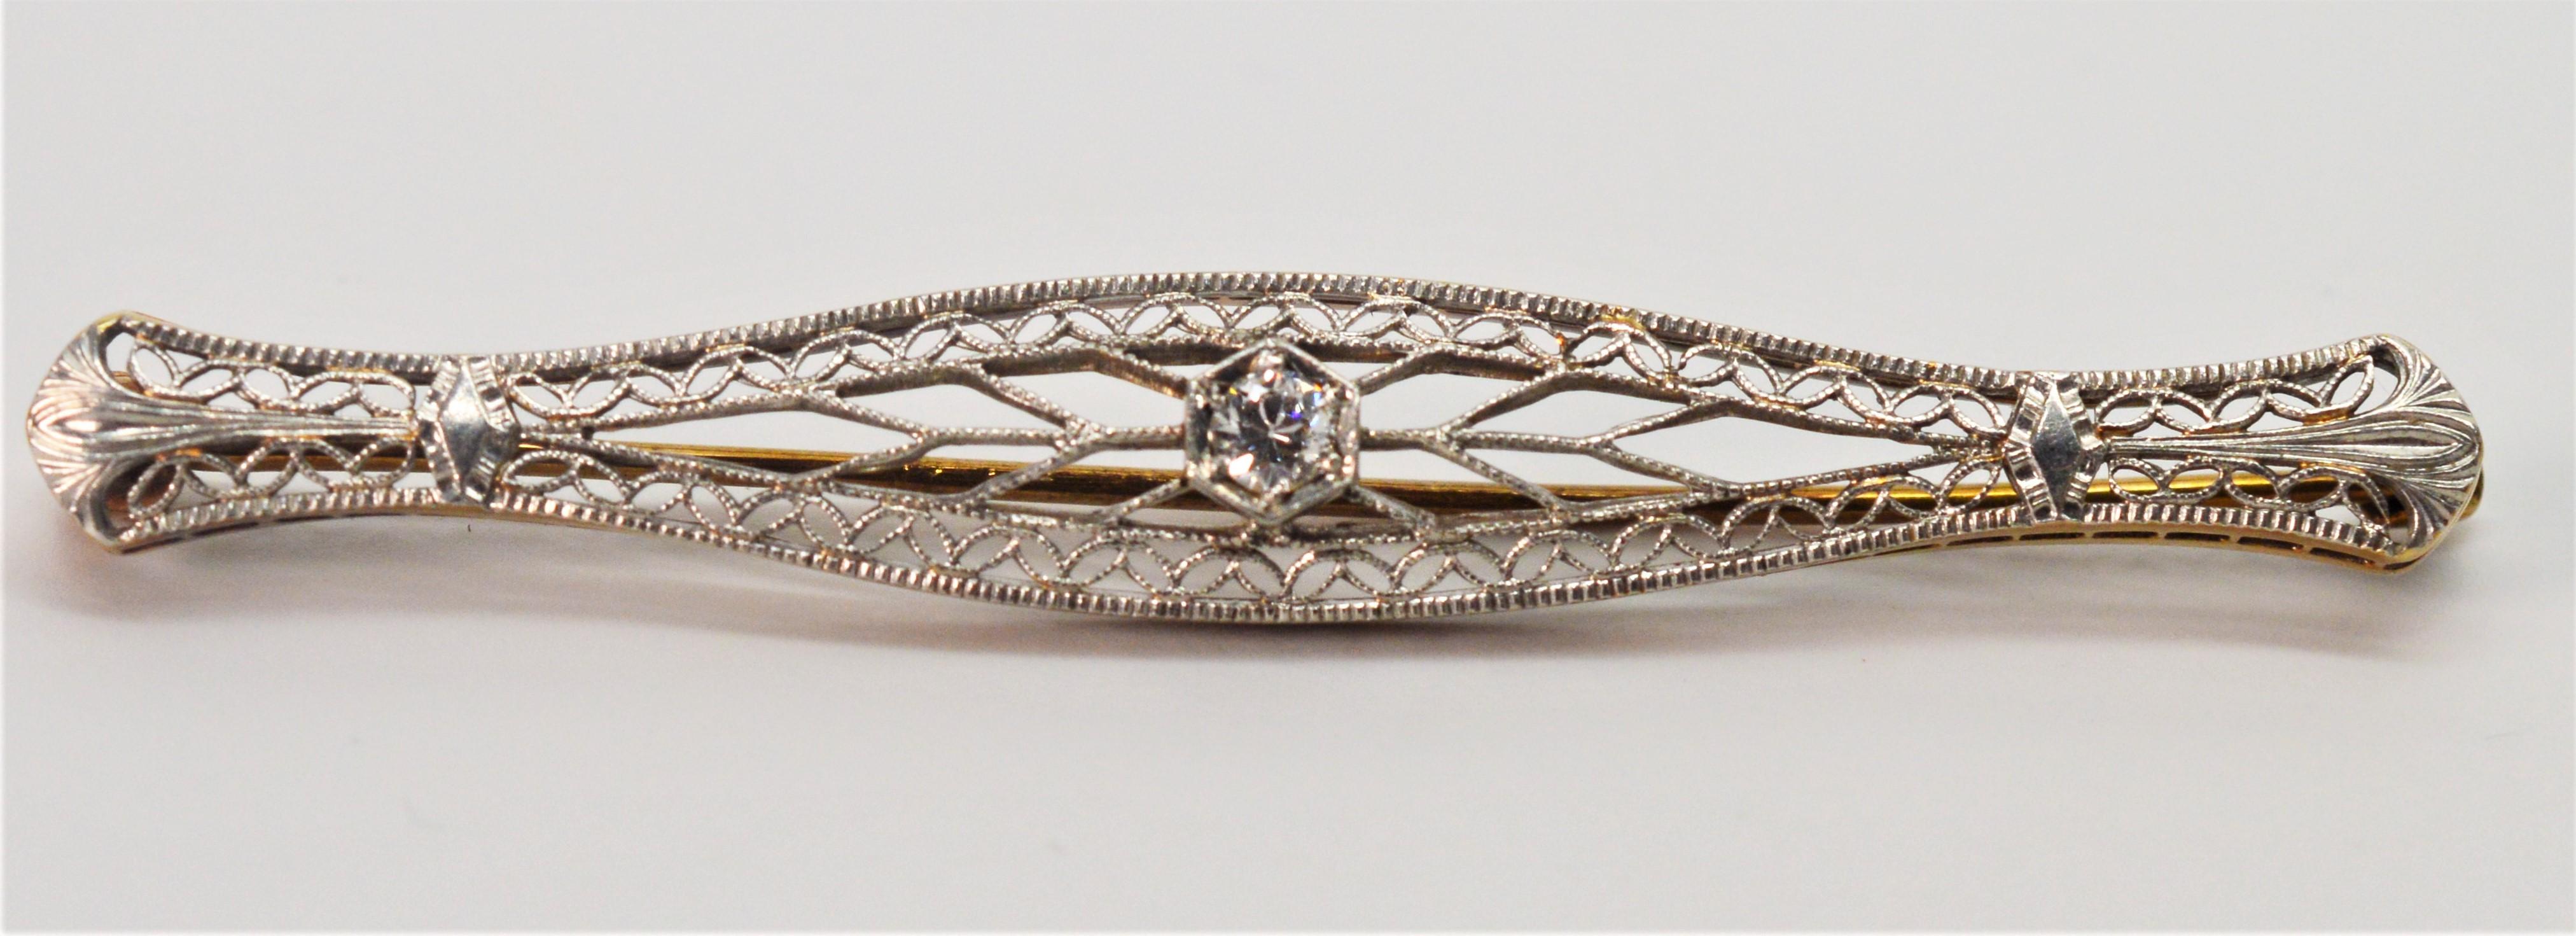 Elegant Art Deco Style fourteen carat 14K gold filigree pin brooch with a center .05 carat miner's cut diamond feature. 
Crafted in classic bowed-shape and measures 2-1/4 inches. Gift boxed. 